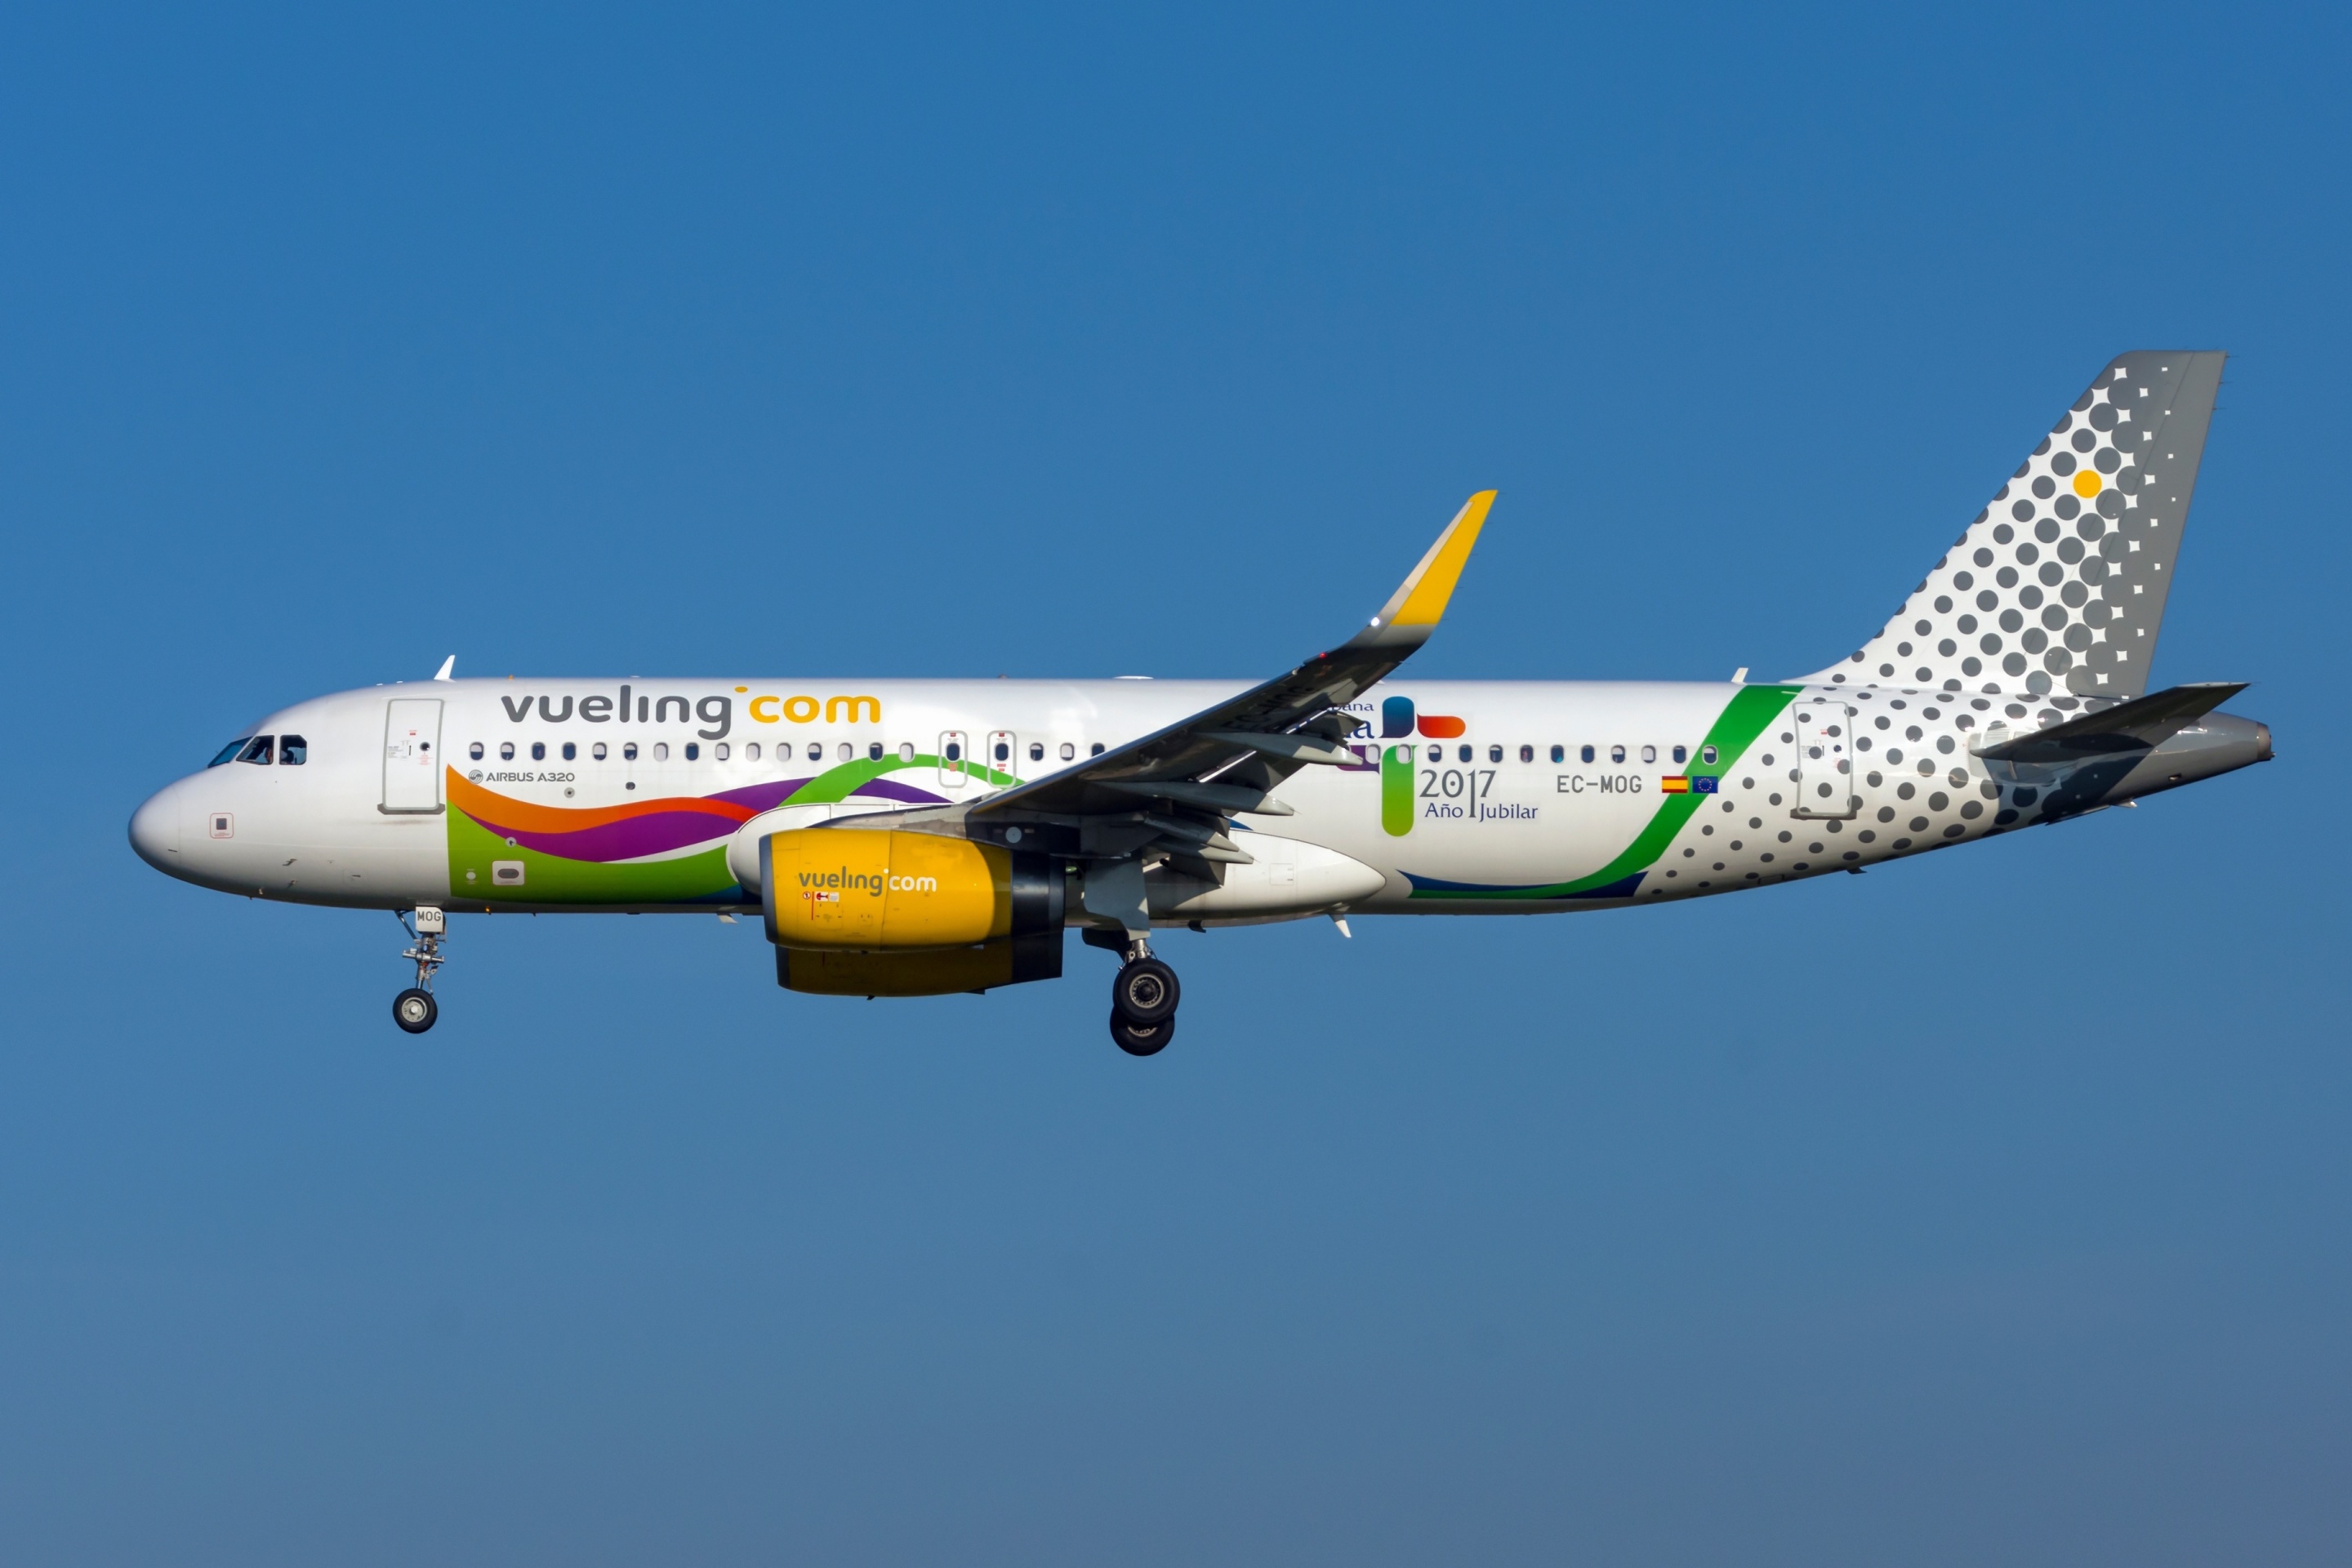 Airbus A320 Vueling Airlines wallpaper 2880x1920